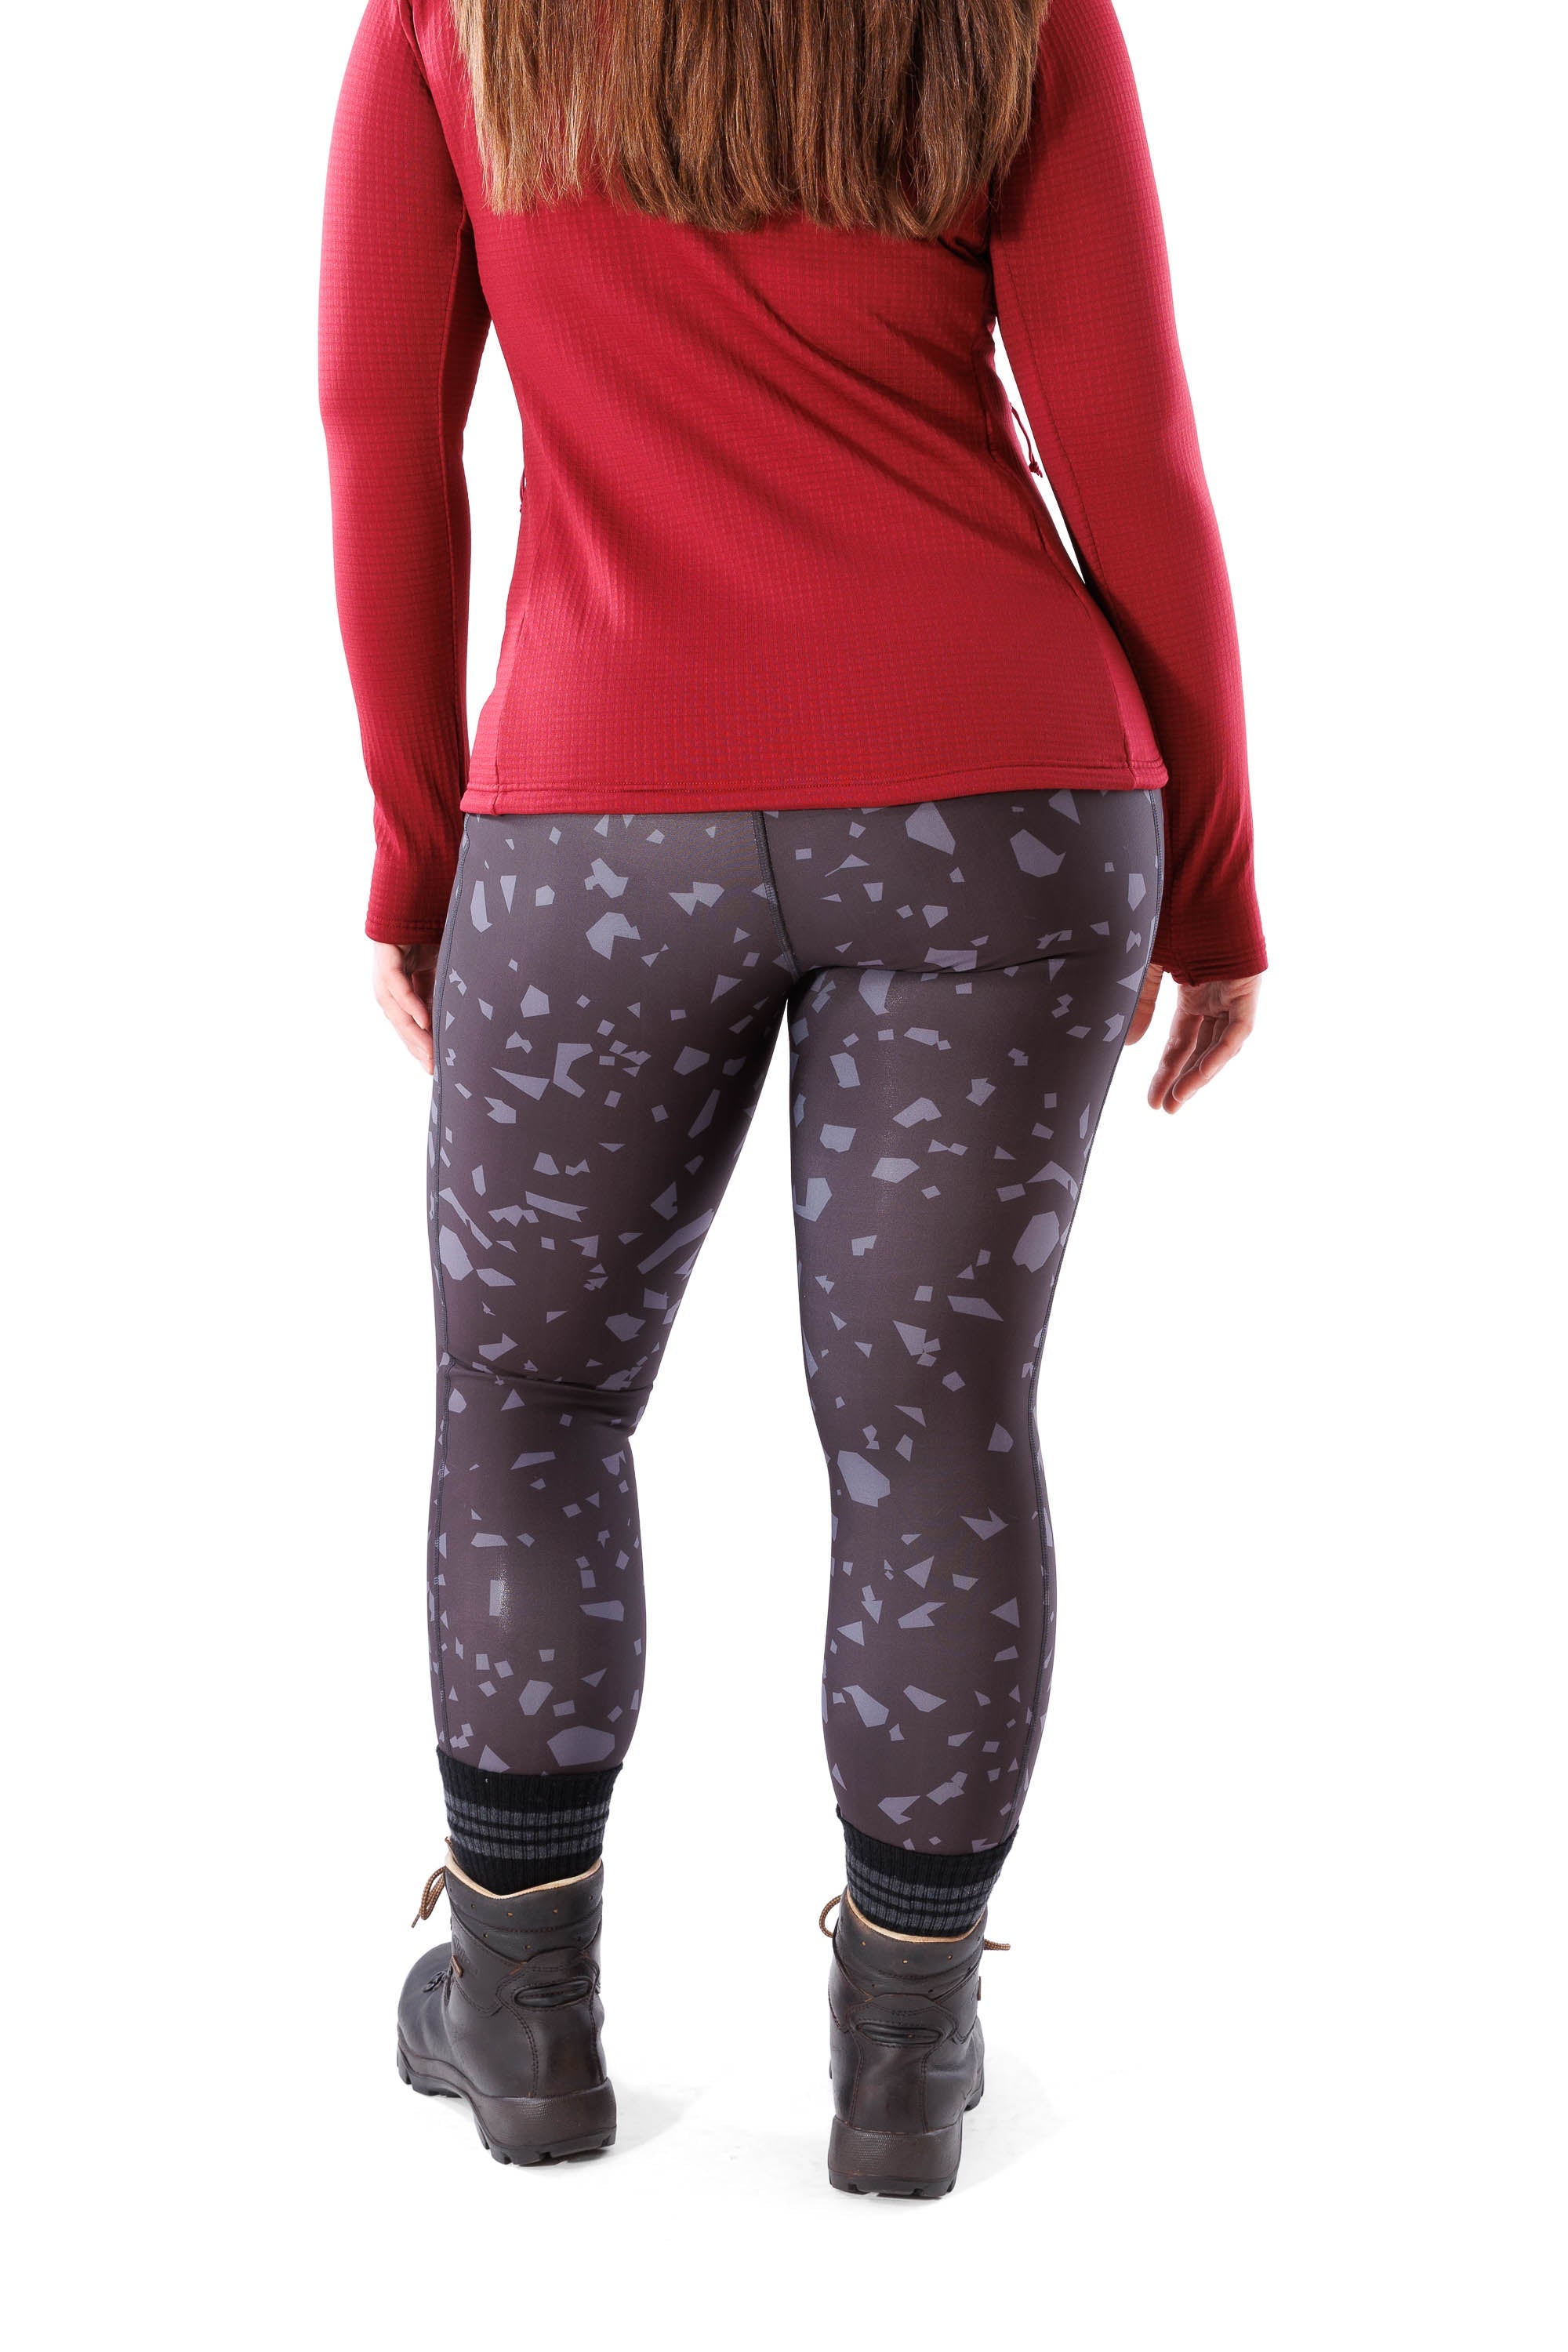 Winter Leggings For Women Fleece Lined  International Society of Precision  Agriculture